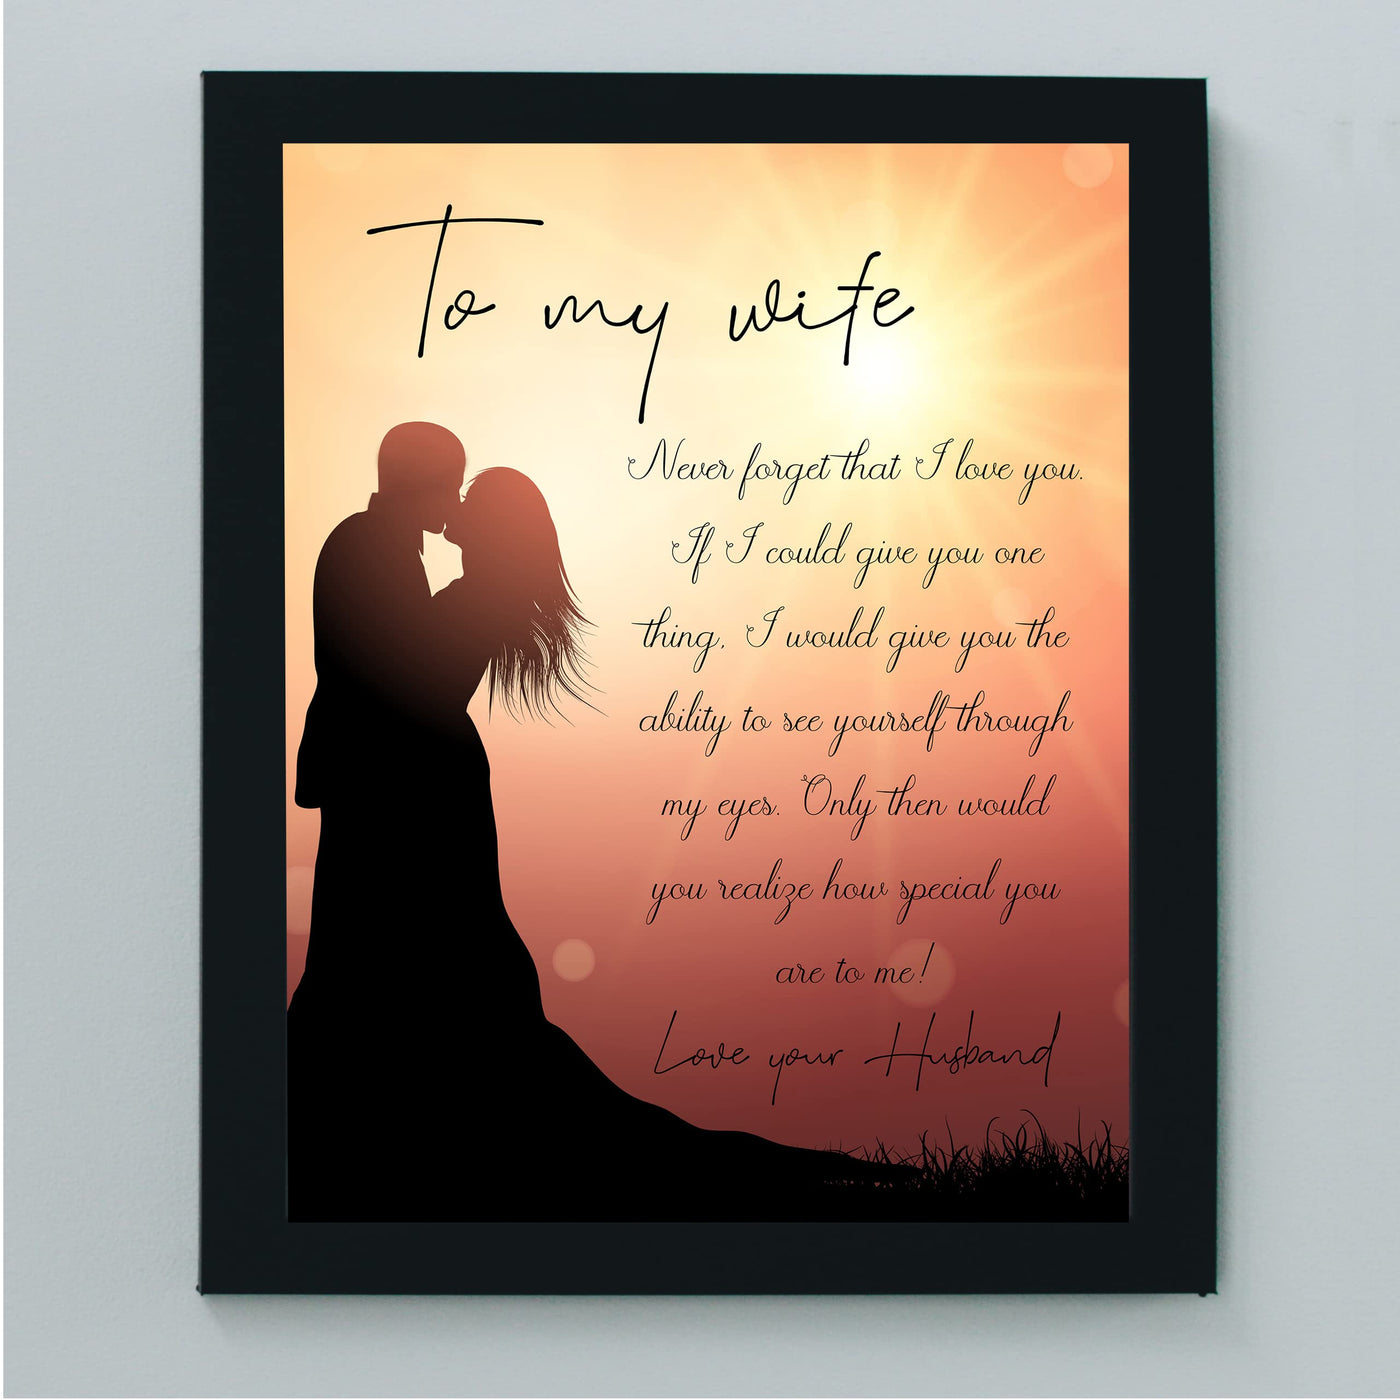 To My Wife-Never Forget I Love You Marriage Quotes Wall Art Decor -8 x10" Sunset Picture w/Couple Silhouette Image -Ready to Frame. Perfect for Spouses & Newlyweds. Great Wedding-Anniversary Gift!